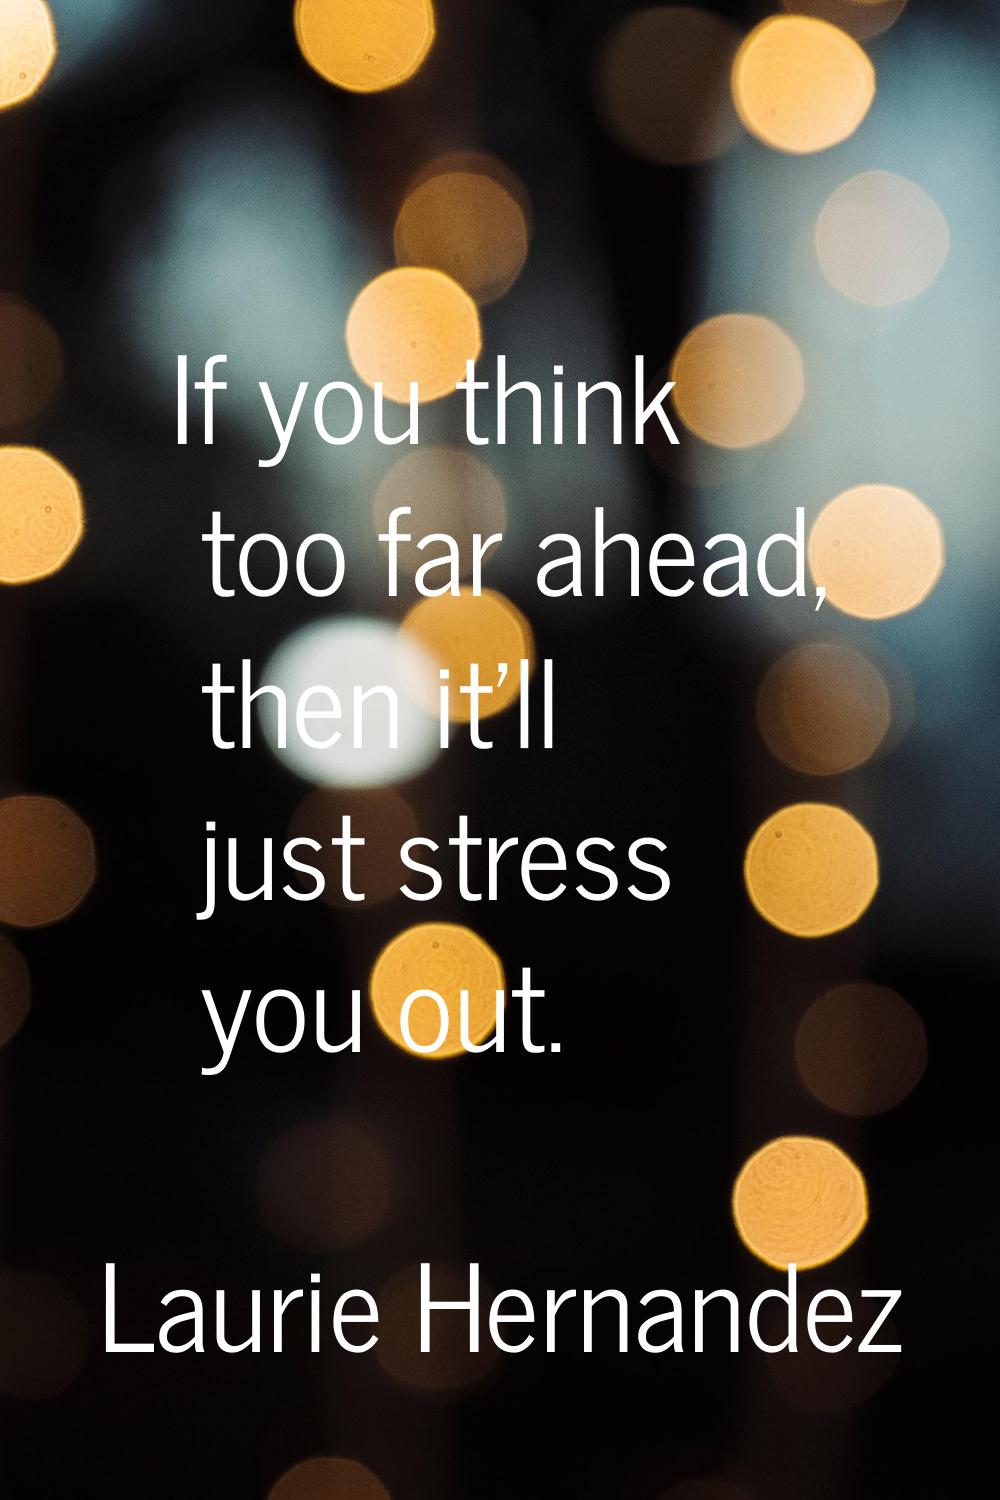 If you think too far ahead, then it'll just stress you out.